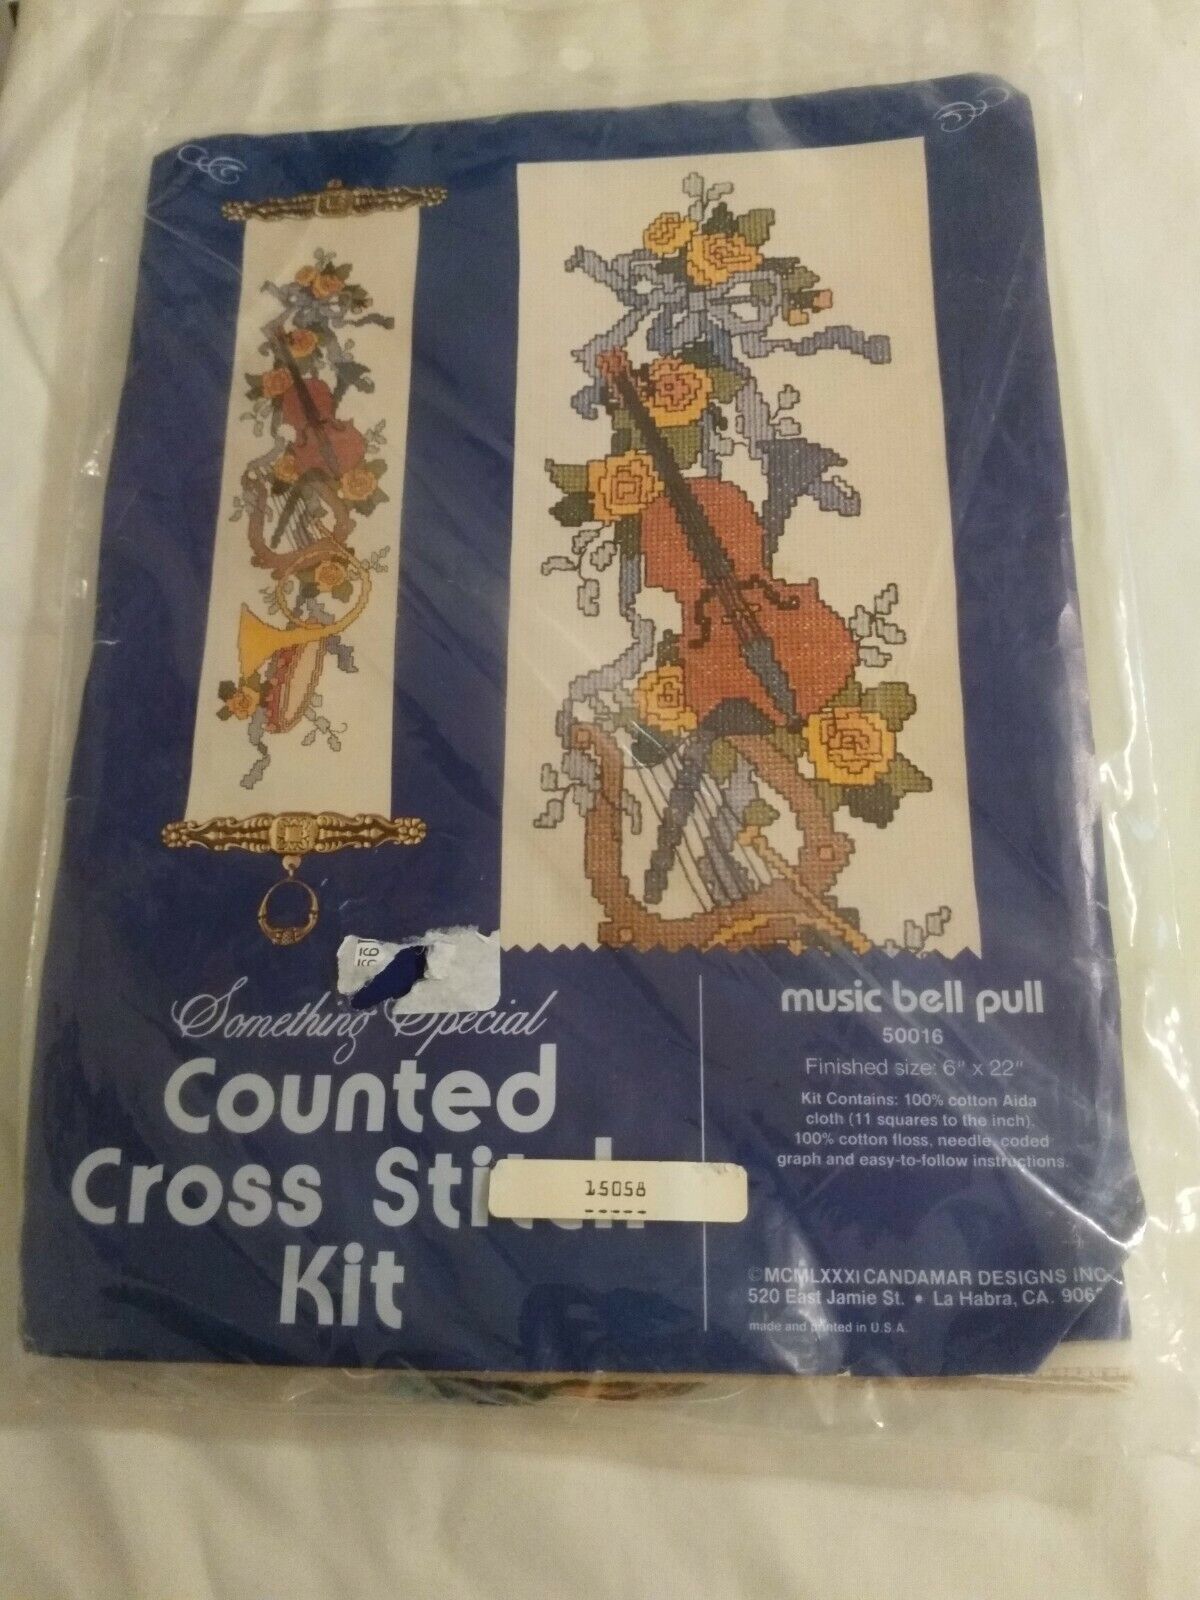 Music Bell Pull Counted Cross Stitch Kit Vintage NEW Sealed Violin Harp 6x22"